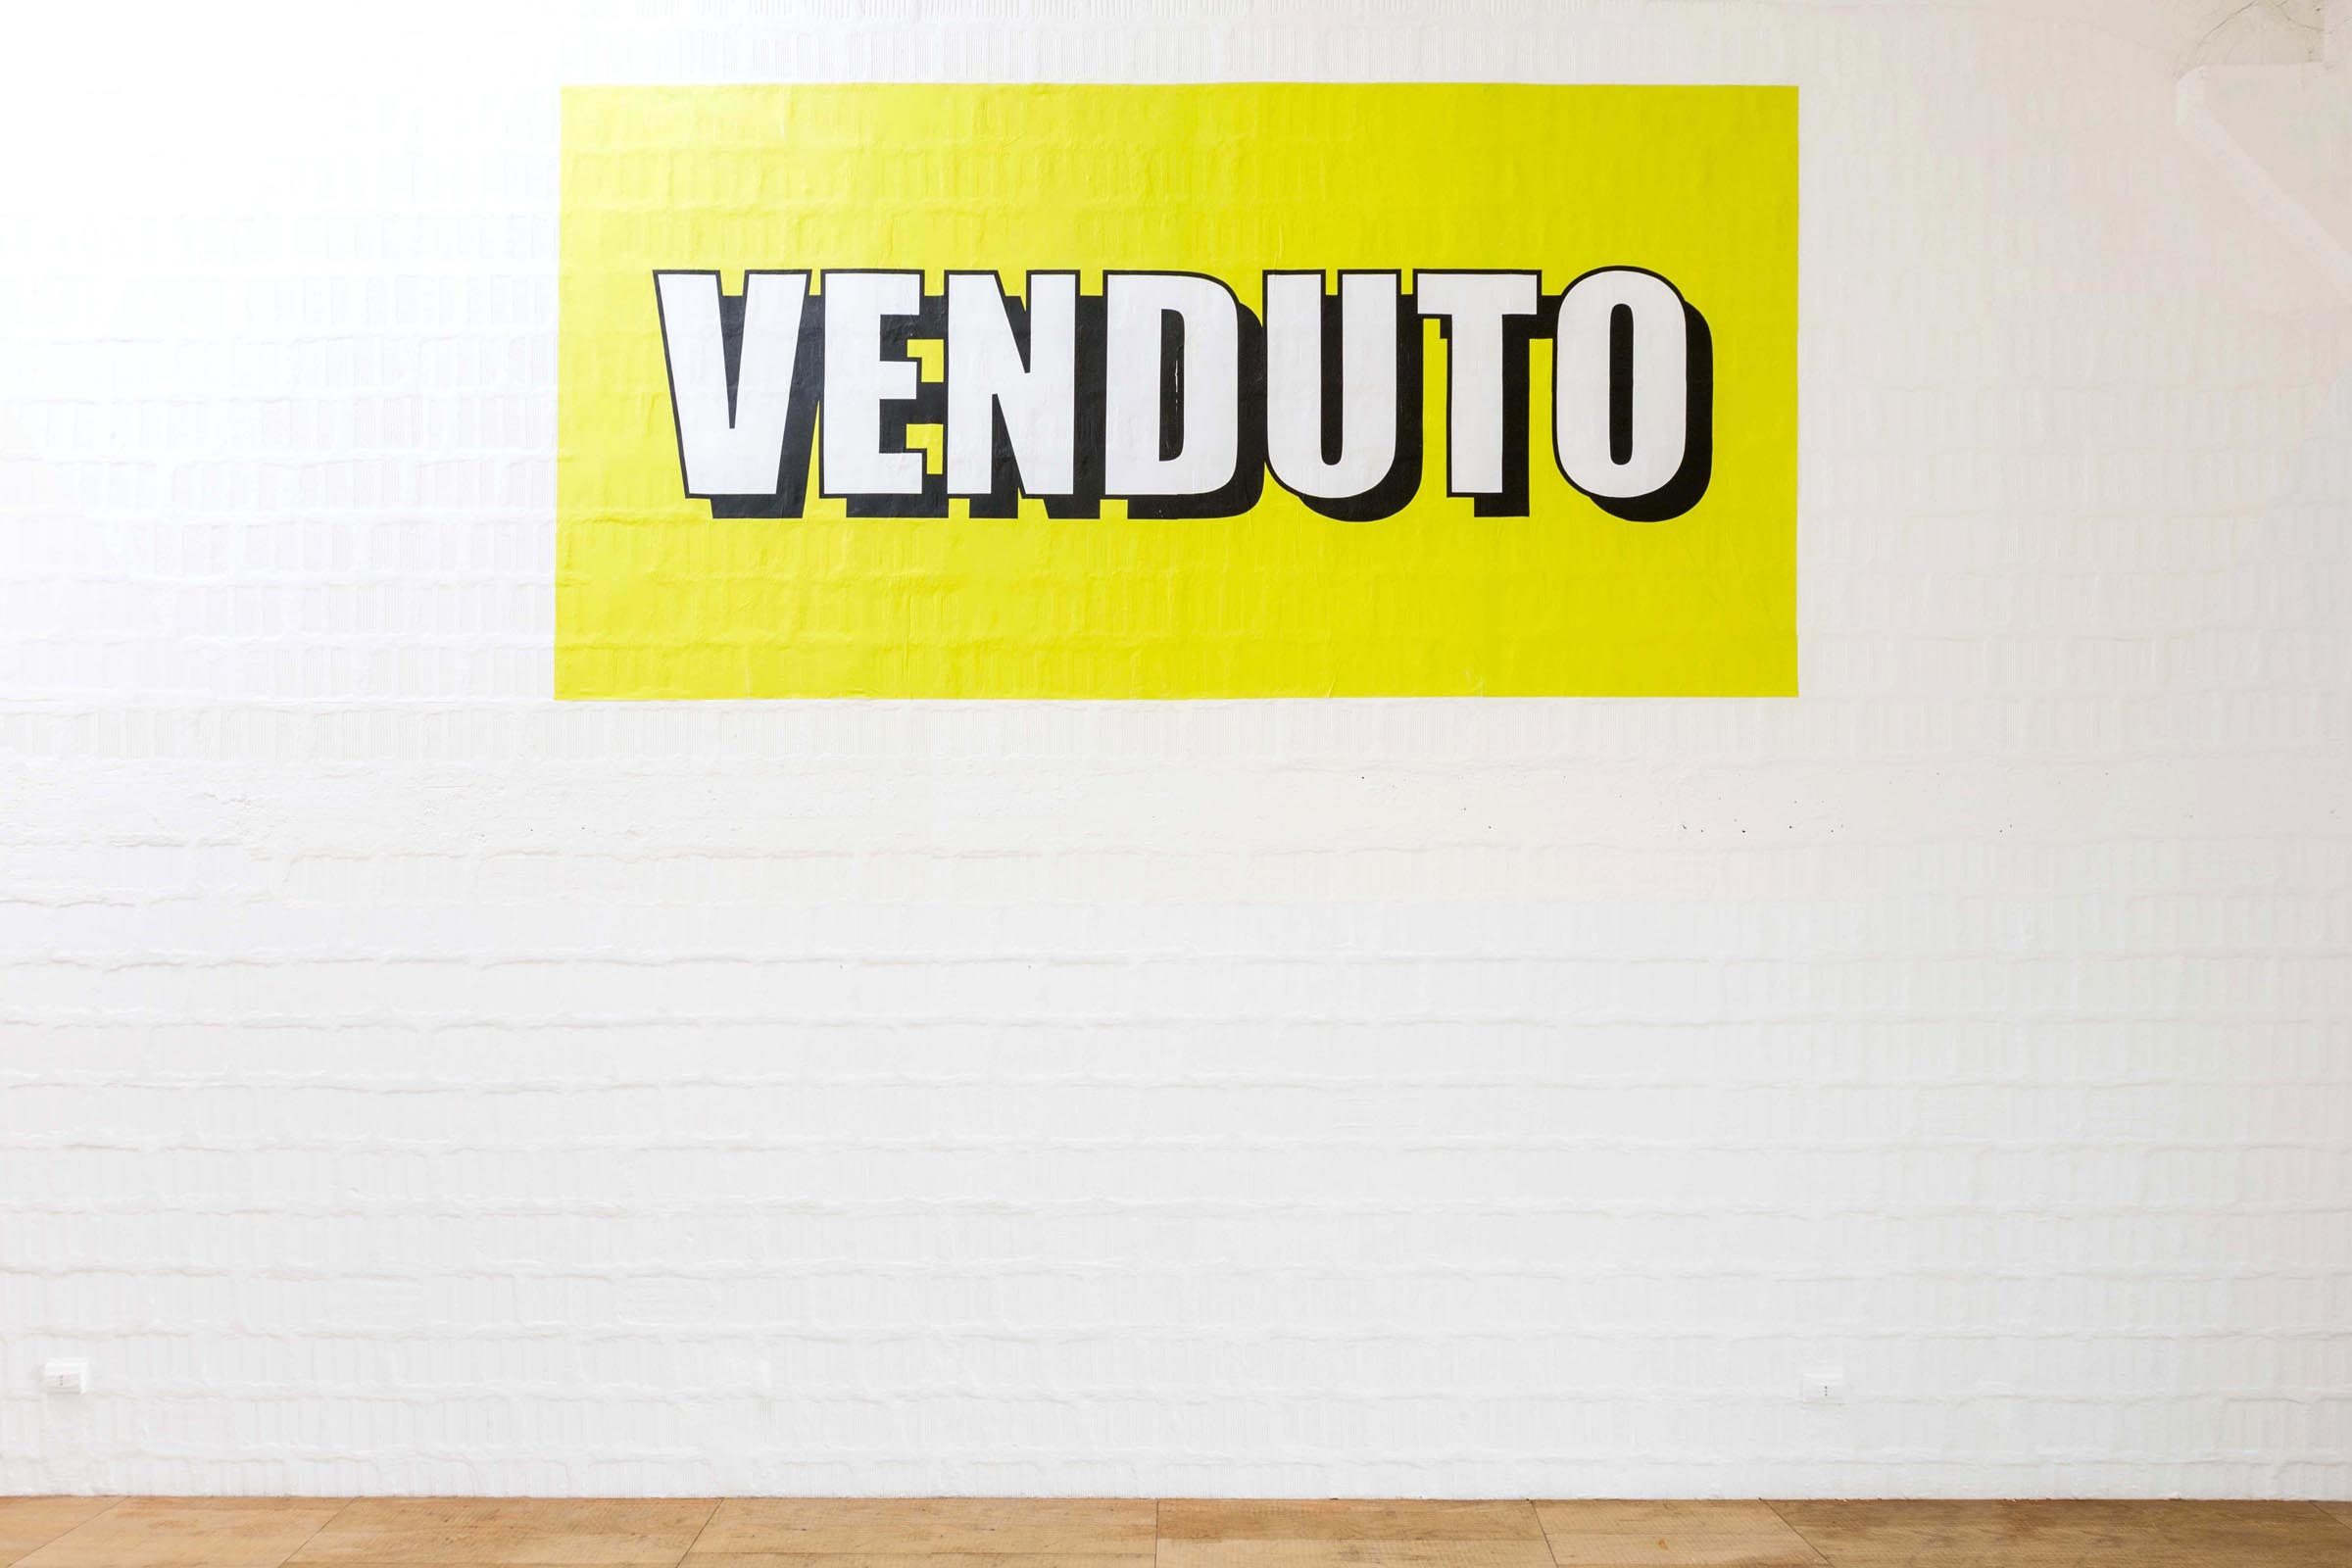 Matteo Attruia, Sold Out, show view, Galleria MDL, Venice, ph. N. Covre